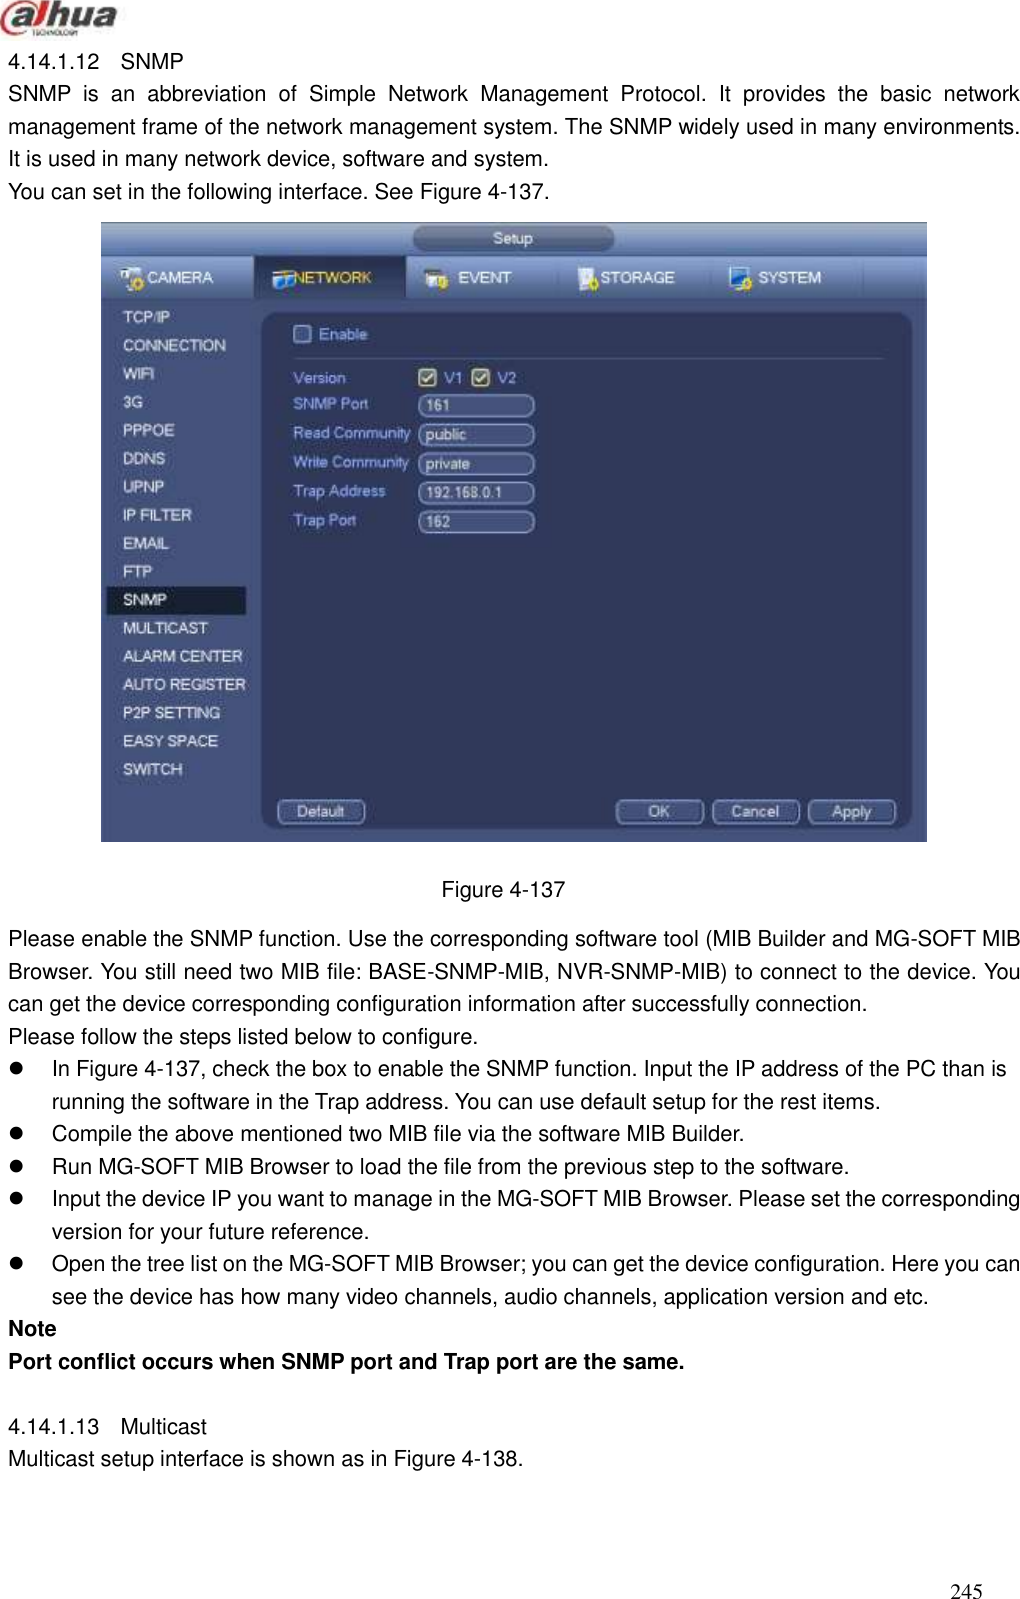  245  4.14.1.12  SNMP SNMP  is  an  abbreviation  of  Simple  Network  Management  Protocol.  It  provides  the  basic  network management frame of the network management system. The SNMP widely used in many environments. It is used in many network device, software and system. You can set in the following interface. See Figure 4-137.  Figure 4-137 Please enable the SNMP function. Use the corresponding software tool (MIB Builder and MG-SOFT MIB Browser. You still need two MIB file: BASE-SNMP-MIB, NVR-SNMP-MIB) to connect to the device. You can get the device corresponding configuration information after successfully connection.   Please follow the steps listed below to configure.     In Figure 4-137, check the box to enable the SNMP function. Input the IP address of the PC than is running the software in the Trap address. You can use default setup for the rest items.     Compile the above mentioned two MIB file via the software MIB Builder.   Run MG-SOFT MIB Browser to load the file from the previous step to the software.     Input the device IP you want to manage in the MG-SOFT MIB Browser. Please set the corresponding version for your future reference.     Open the tree list on the MG-SOFT MIB Browser; you can get the device configuration. Here you can see the device has how many video channels, audio channels, application version and etc.   Note Port conflict occurs when SNMP port and Trap port are the same.    4.14.1.13  Multicast     Multicast setup interface is shown as in Figure 4-138.   